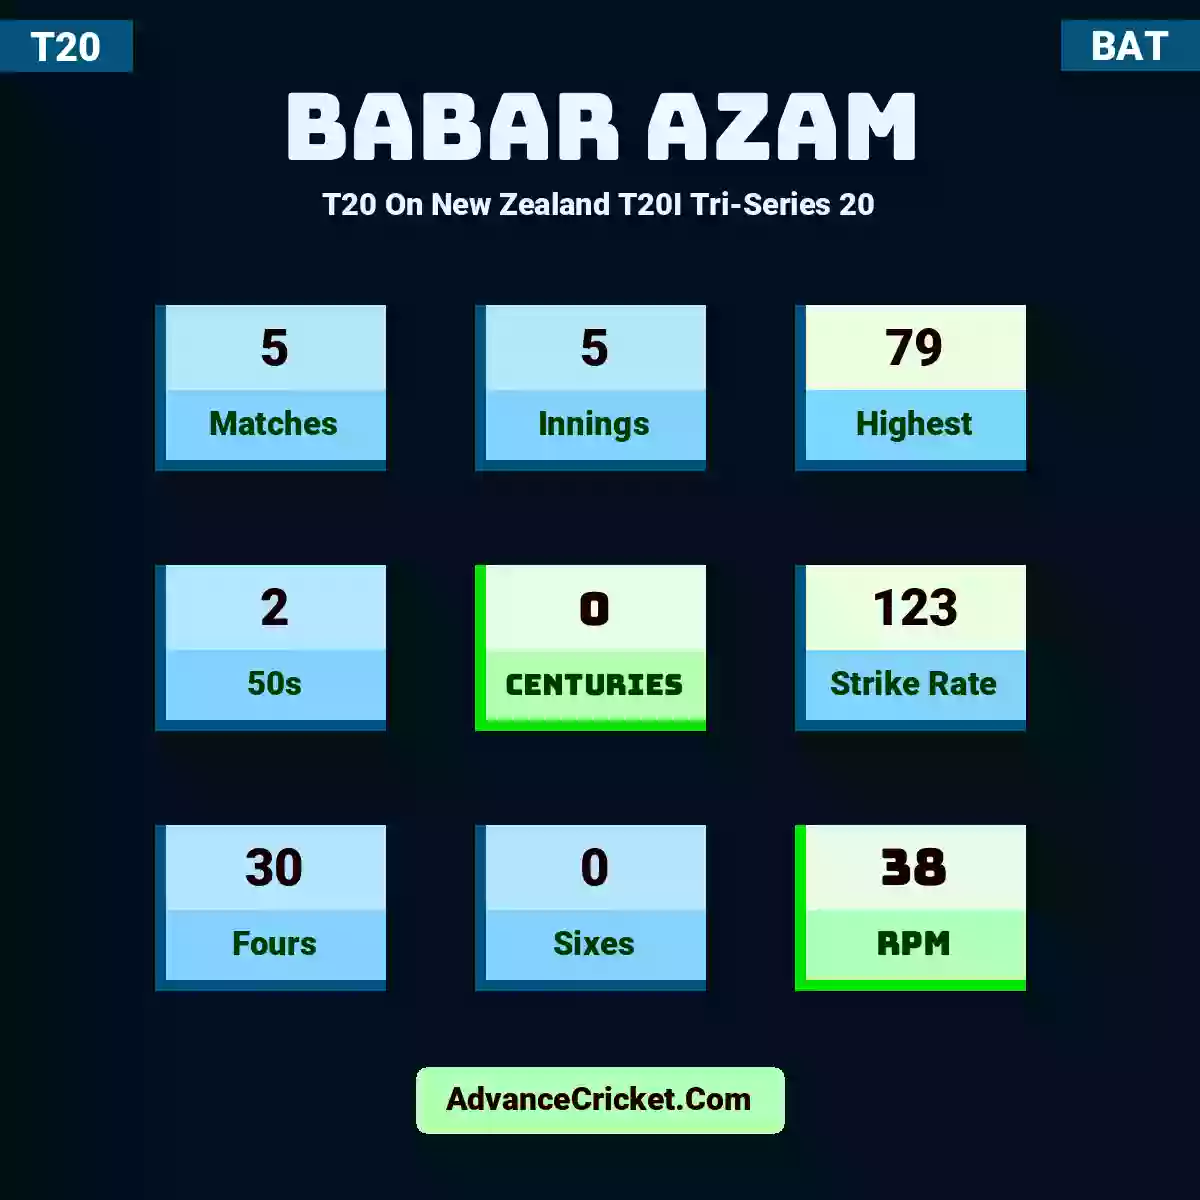 Babar Azam T20  On New Zealand T20I Tri-Series 20, Babar Azam played 5 matches, scored 79 runs as highest, 2 half-centuries, and 0 centuries, with a strike rate of 123. B.Azam hit 30 fours and 0 sixes, with an RPM of 38.